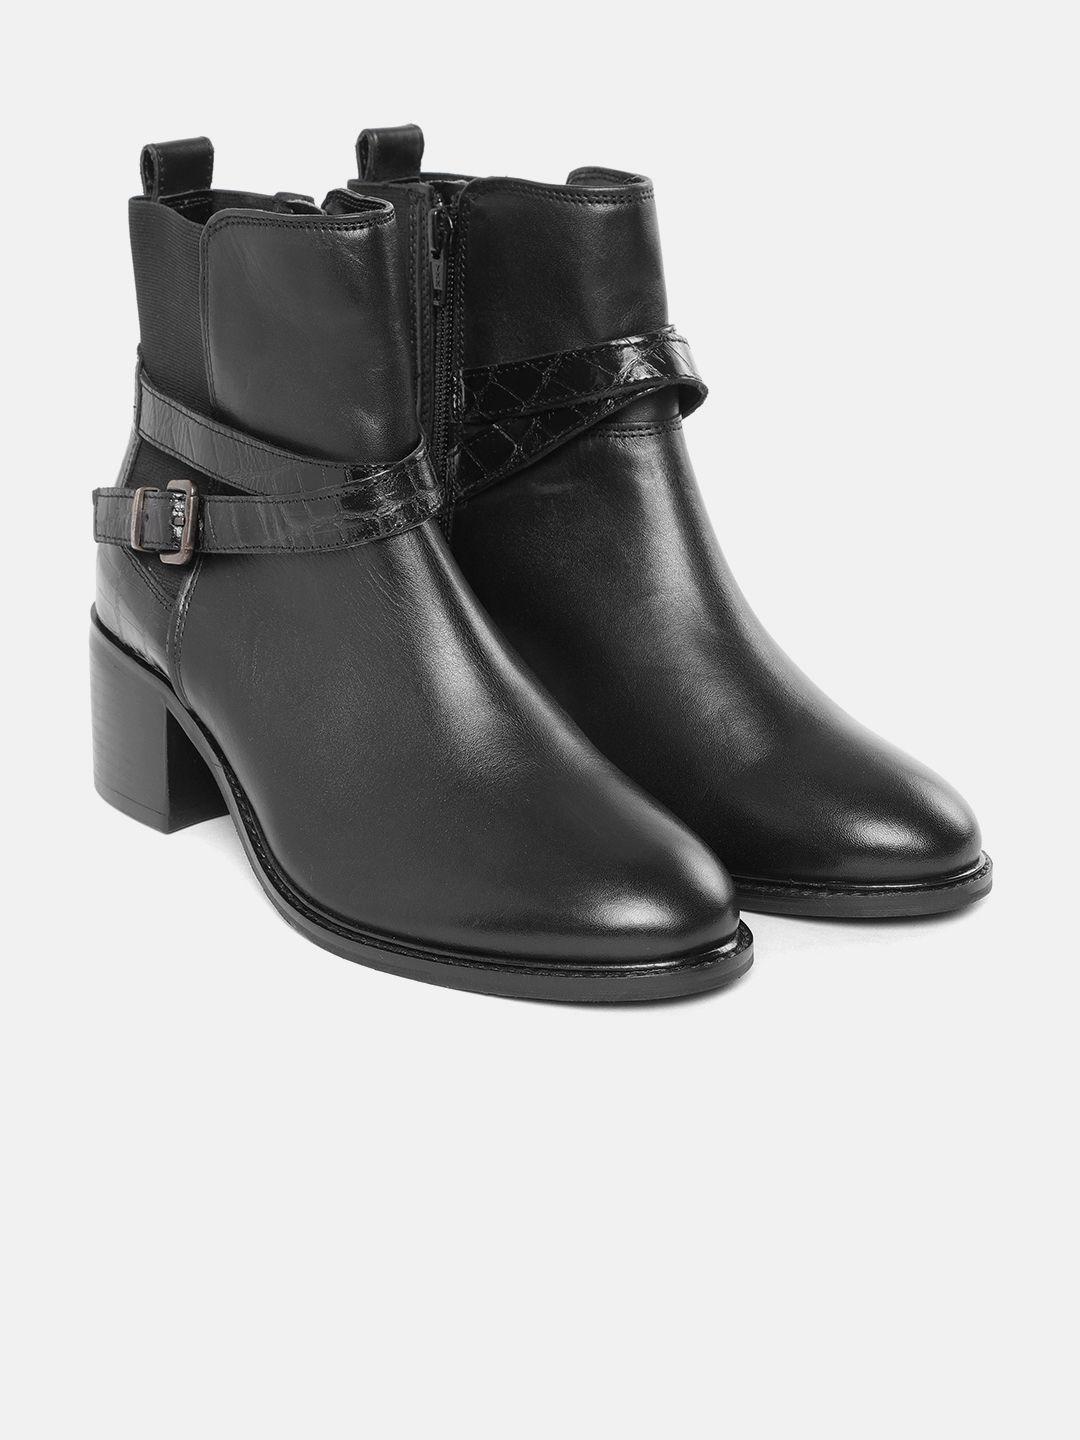 marks & spencer women black leather croc textured detail mid-top heeled boots